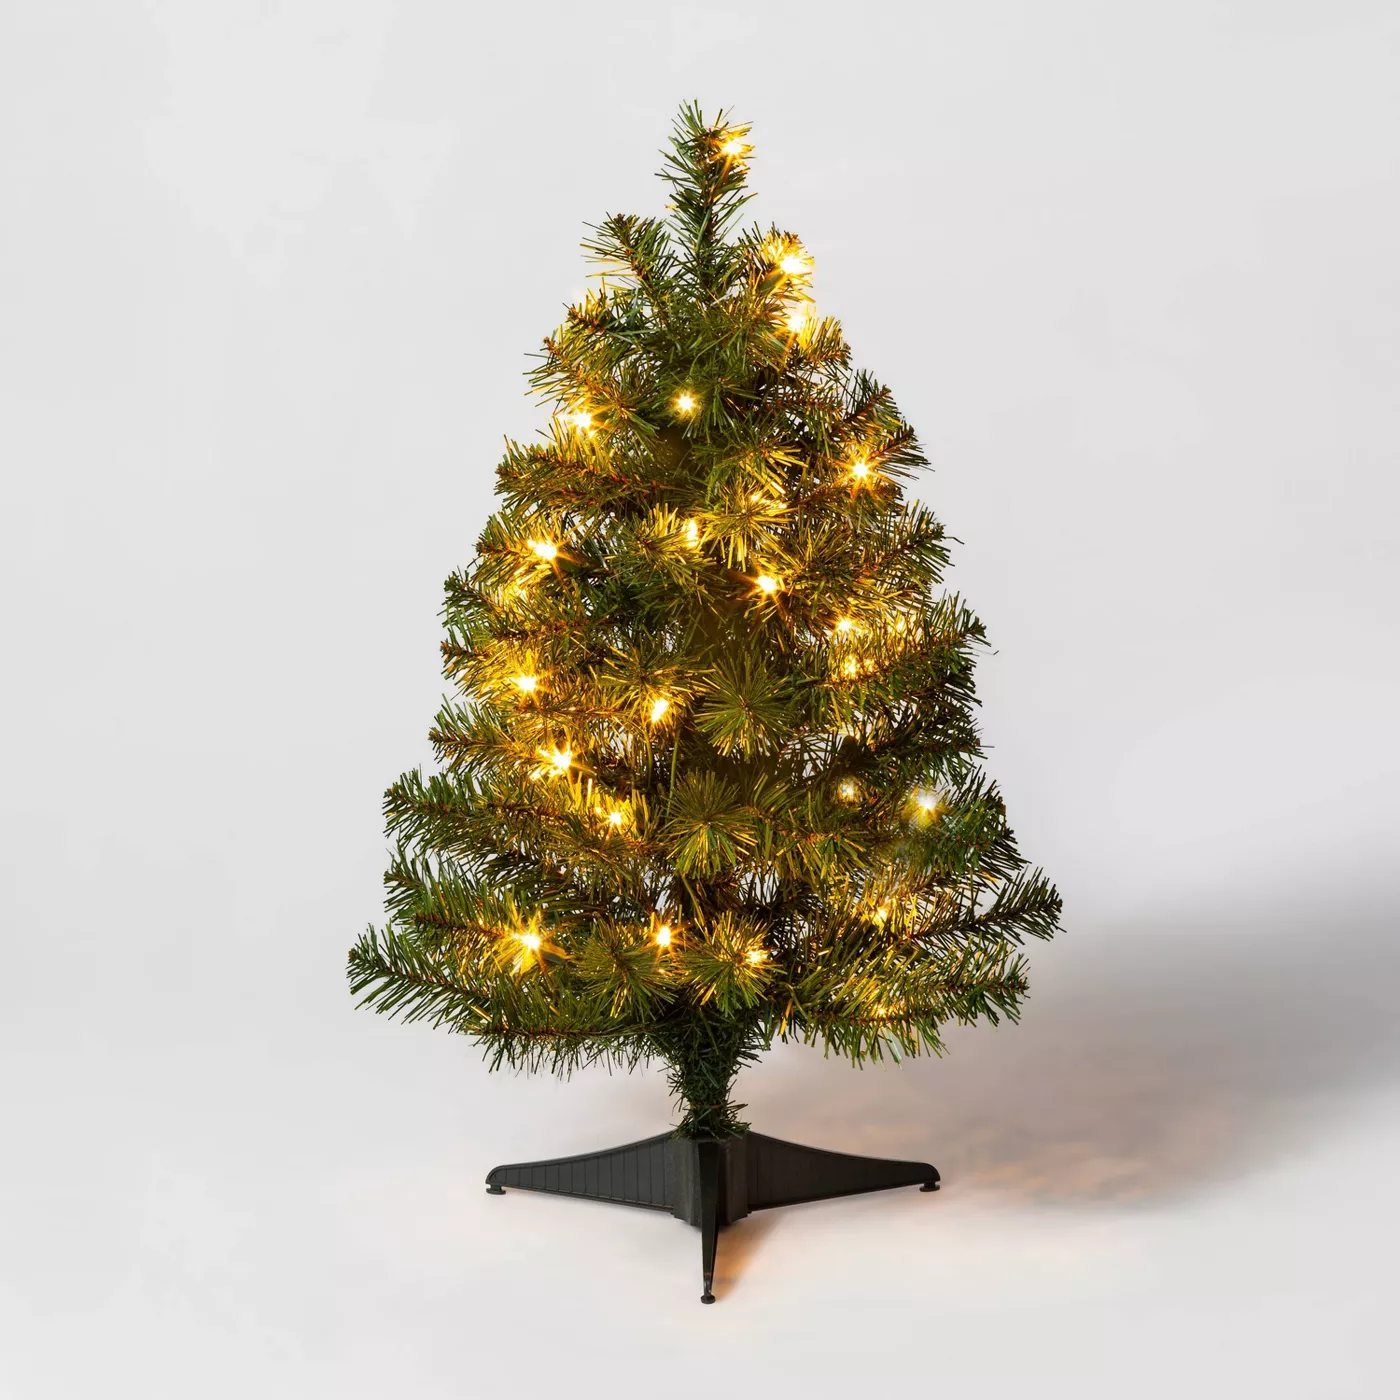 Target 2ft Pre-lit Alberta Spruce Clear Lights Artificial Christmas Tree